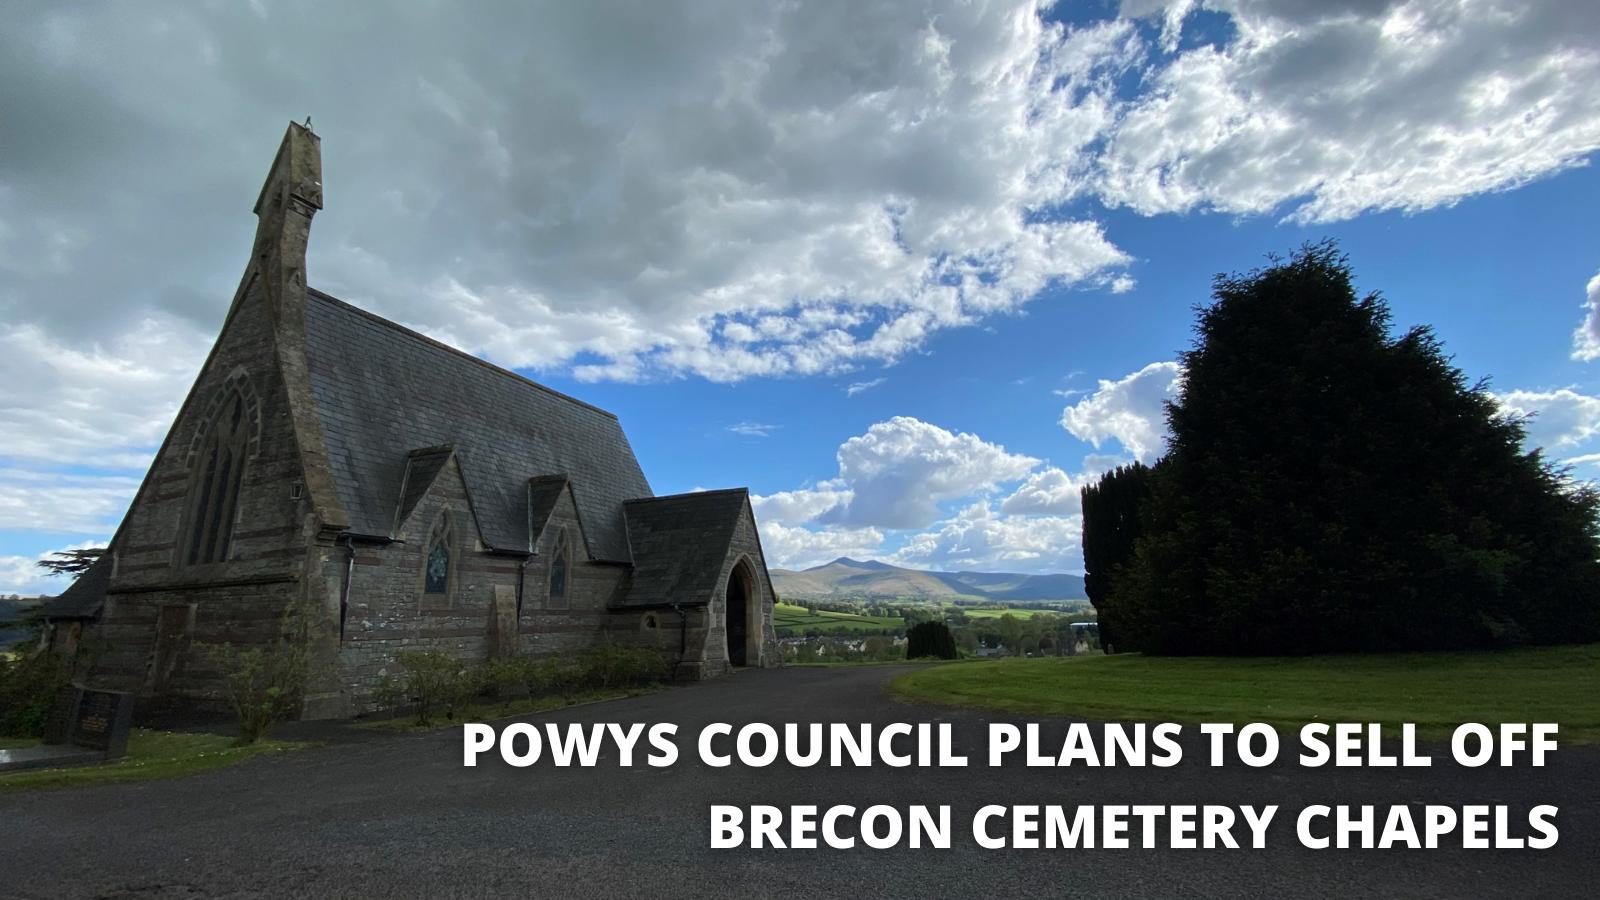 Powys County Council is preparing to sell off the two chapels at Brecon Cemetery.